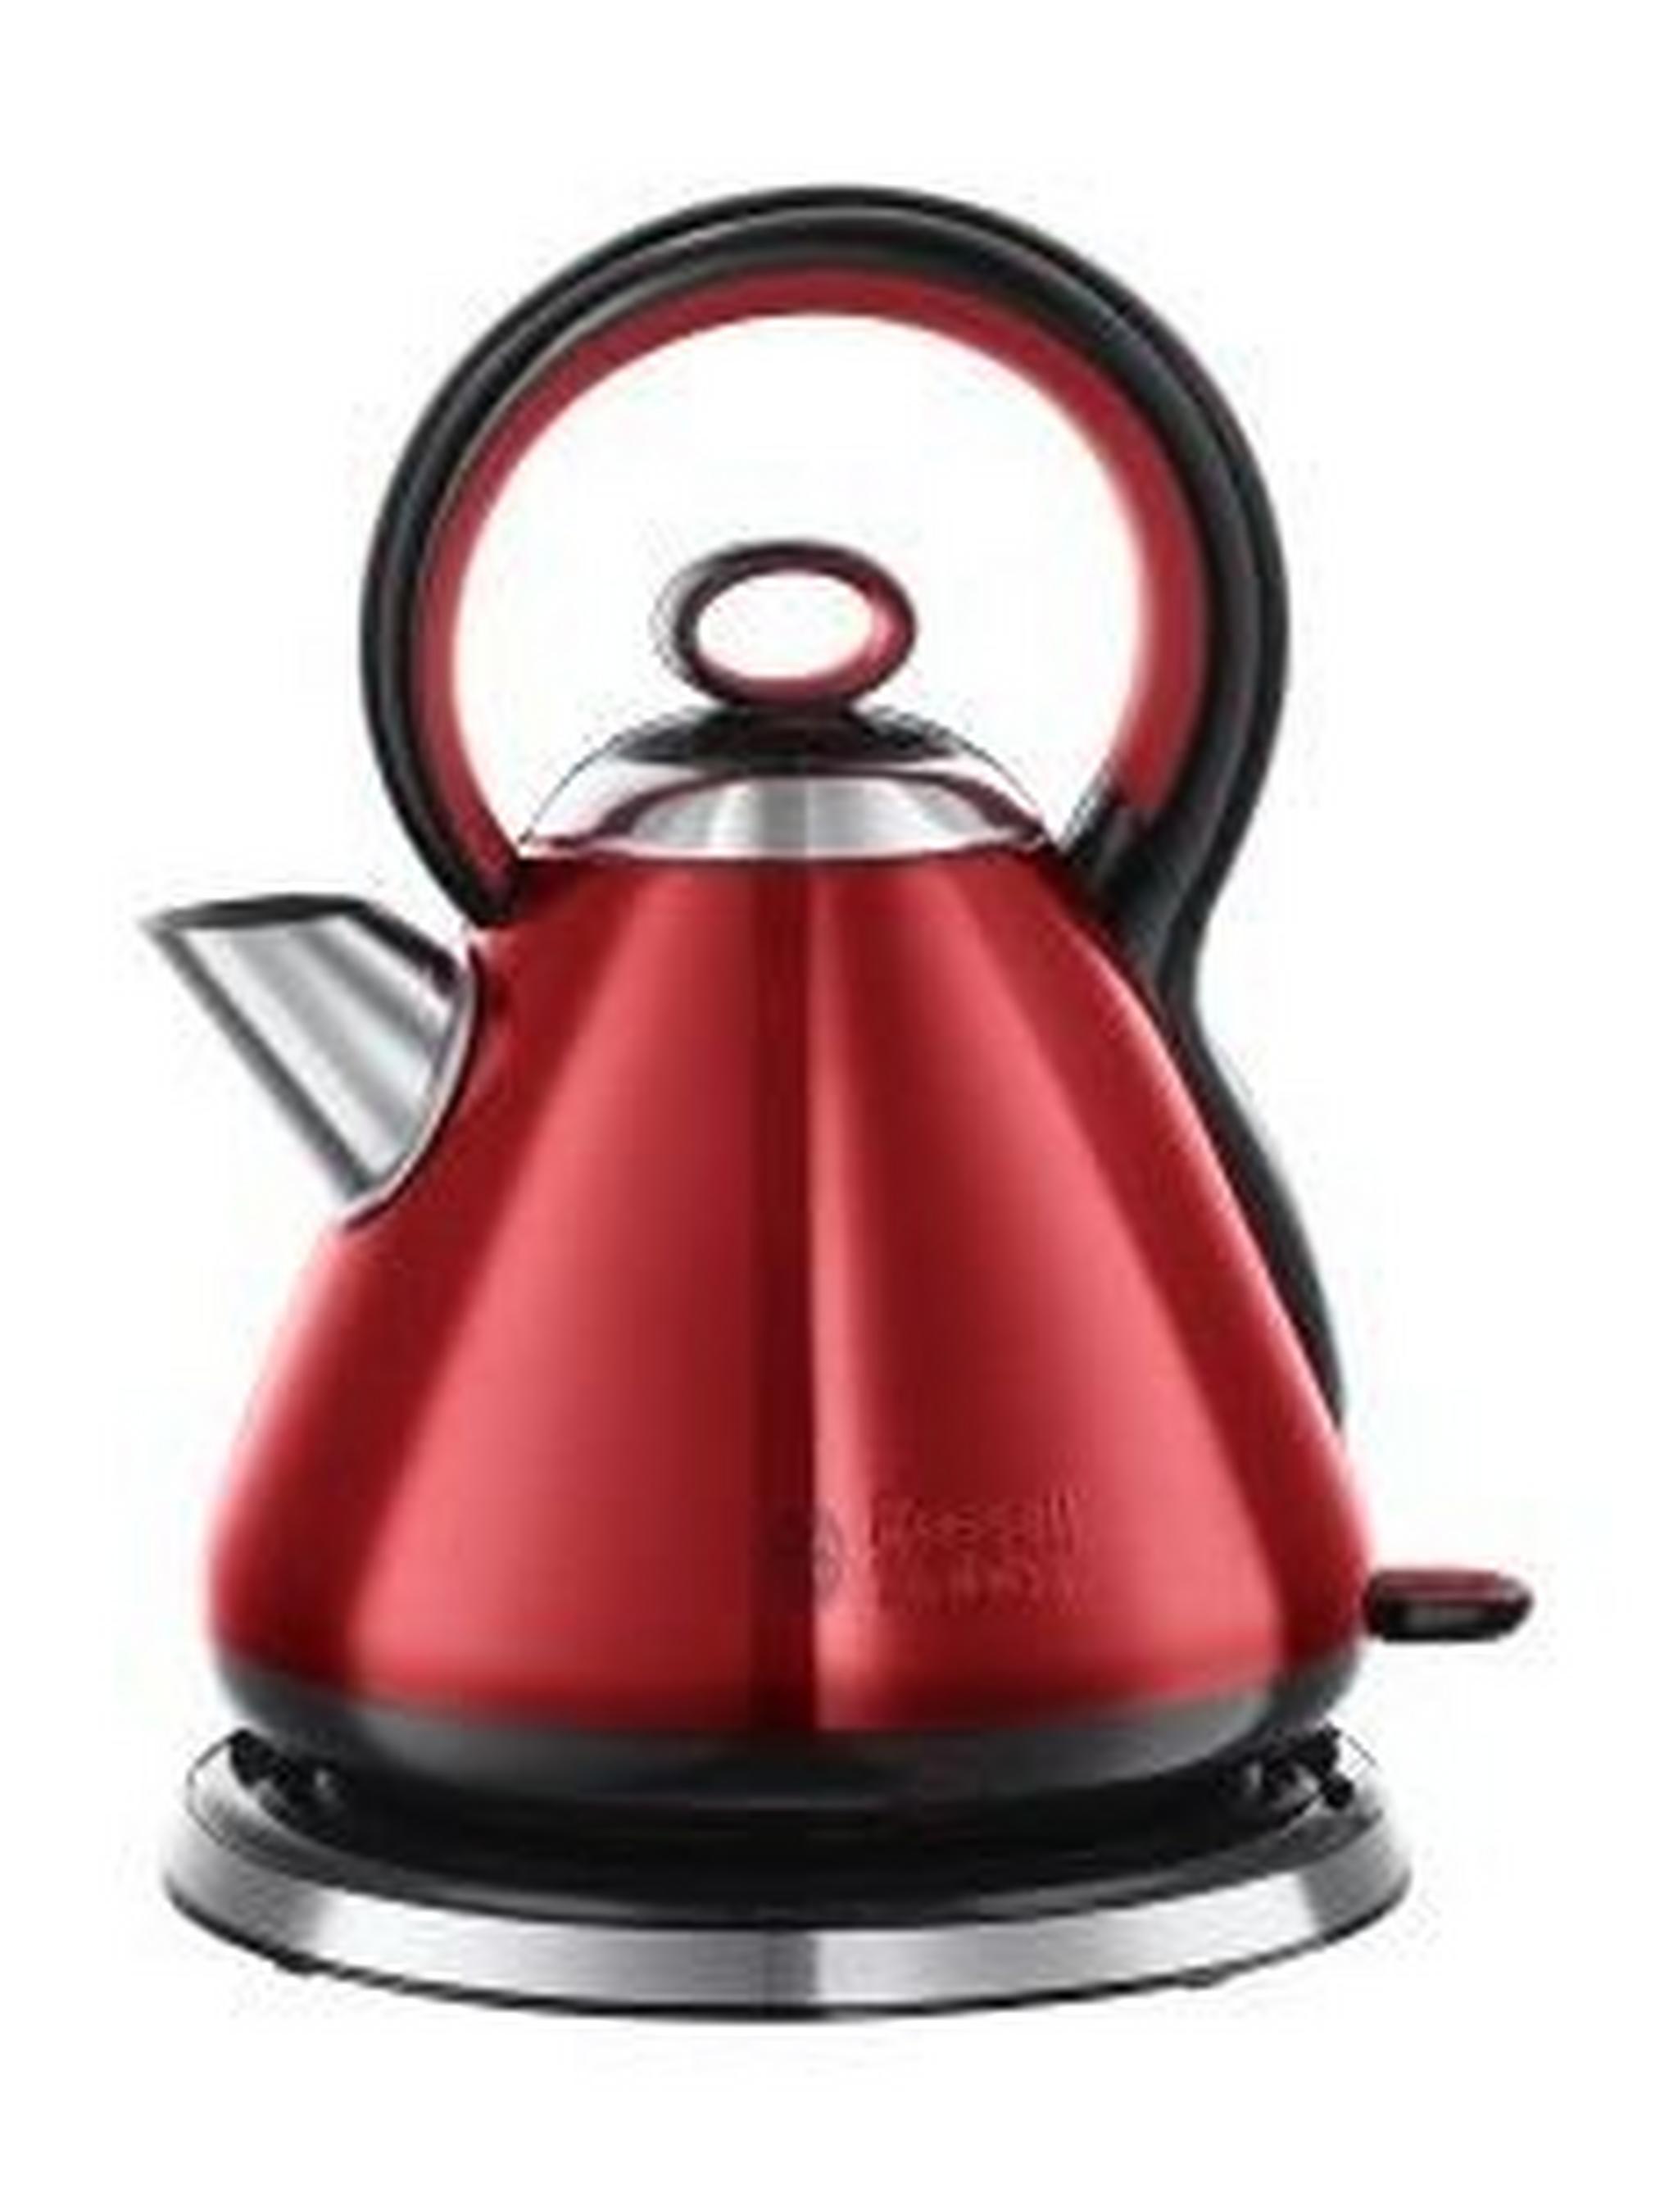 Russell Hobbs 1.7L Legacy Kettle (21881) - Red